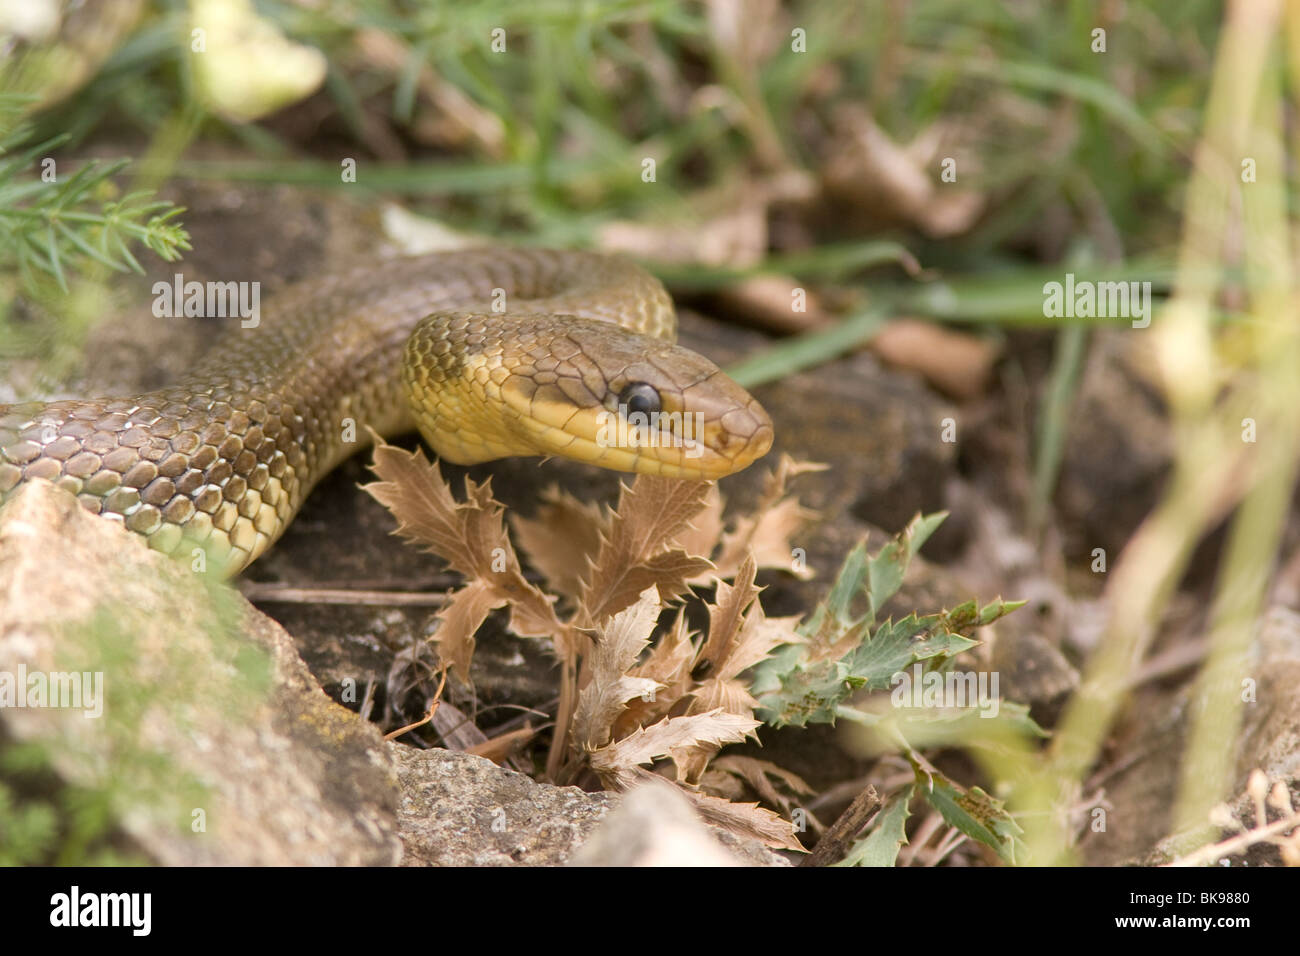 Portrait of an Aesculapian Snake (Elaphe longissima) on the ground with dry prickly leafs. Stock Photo